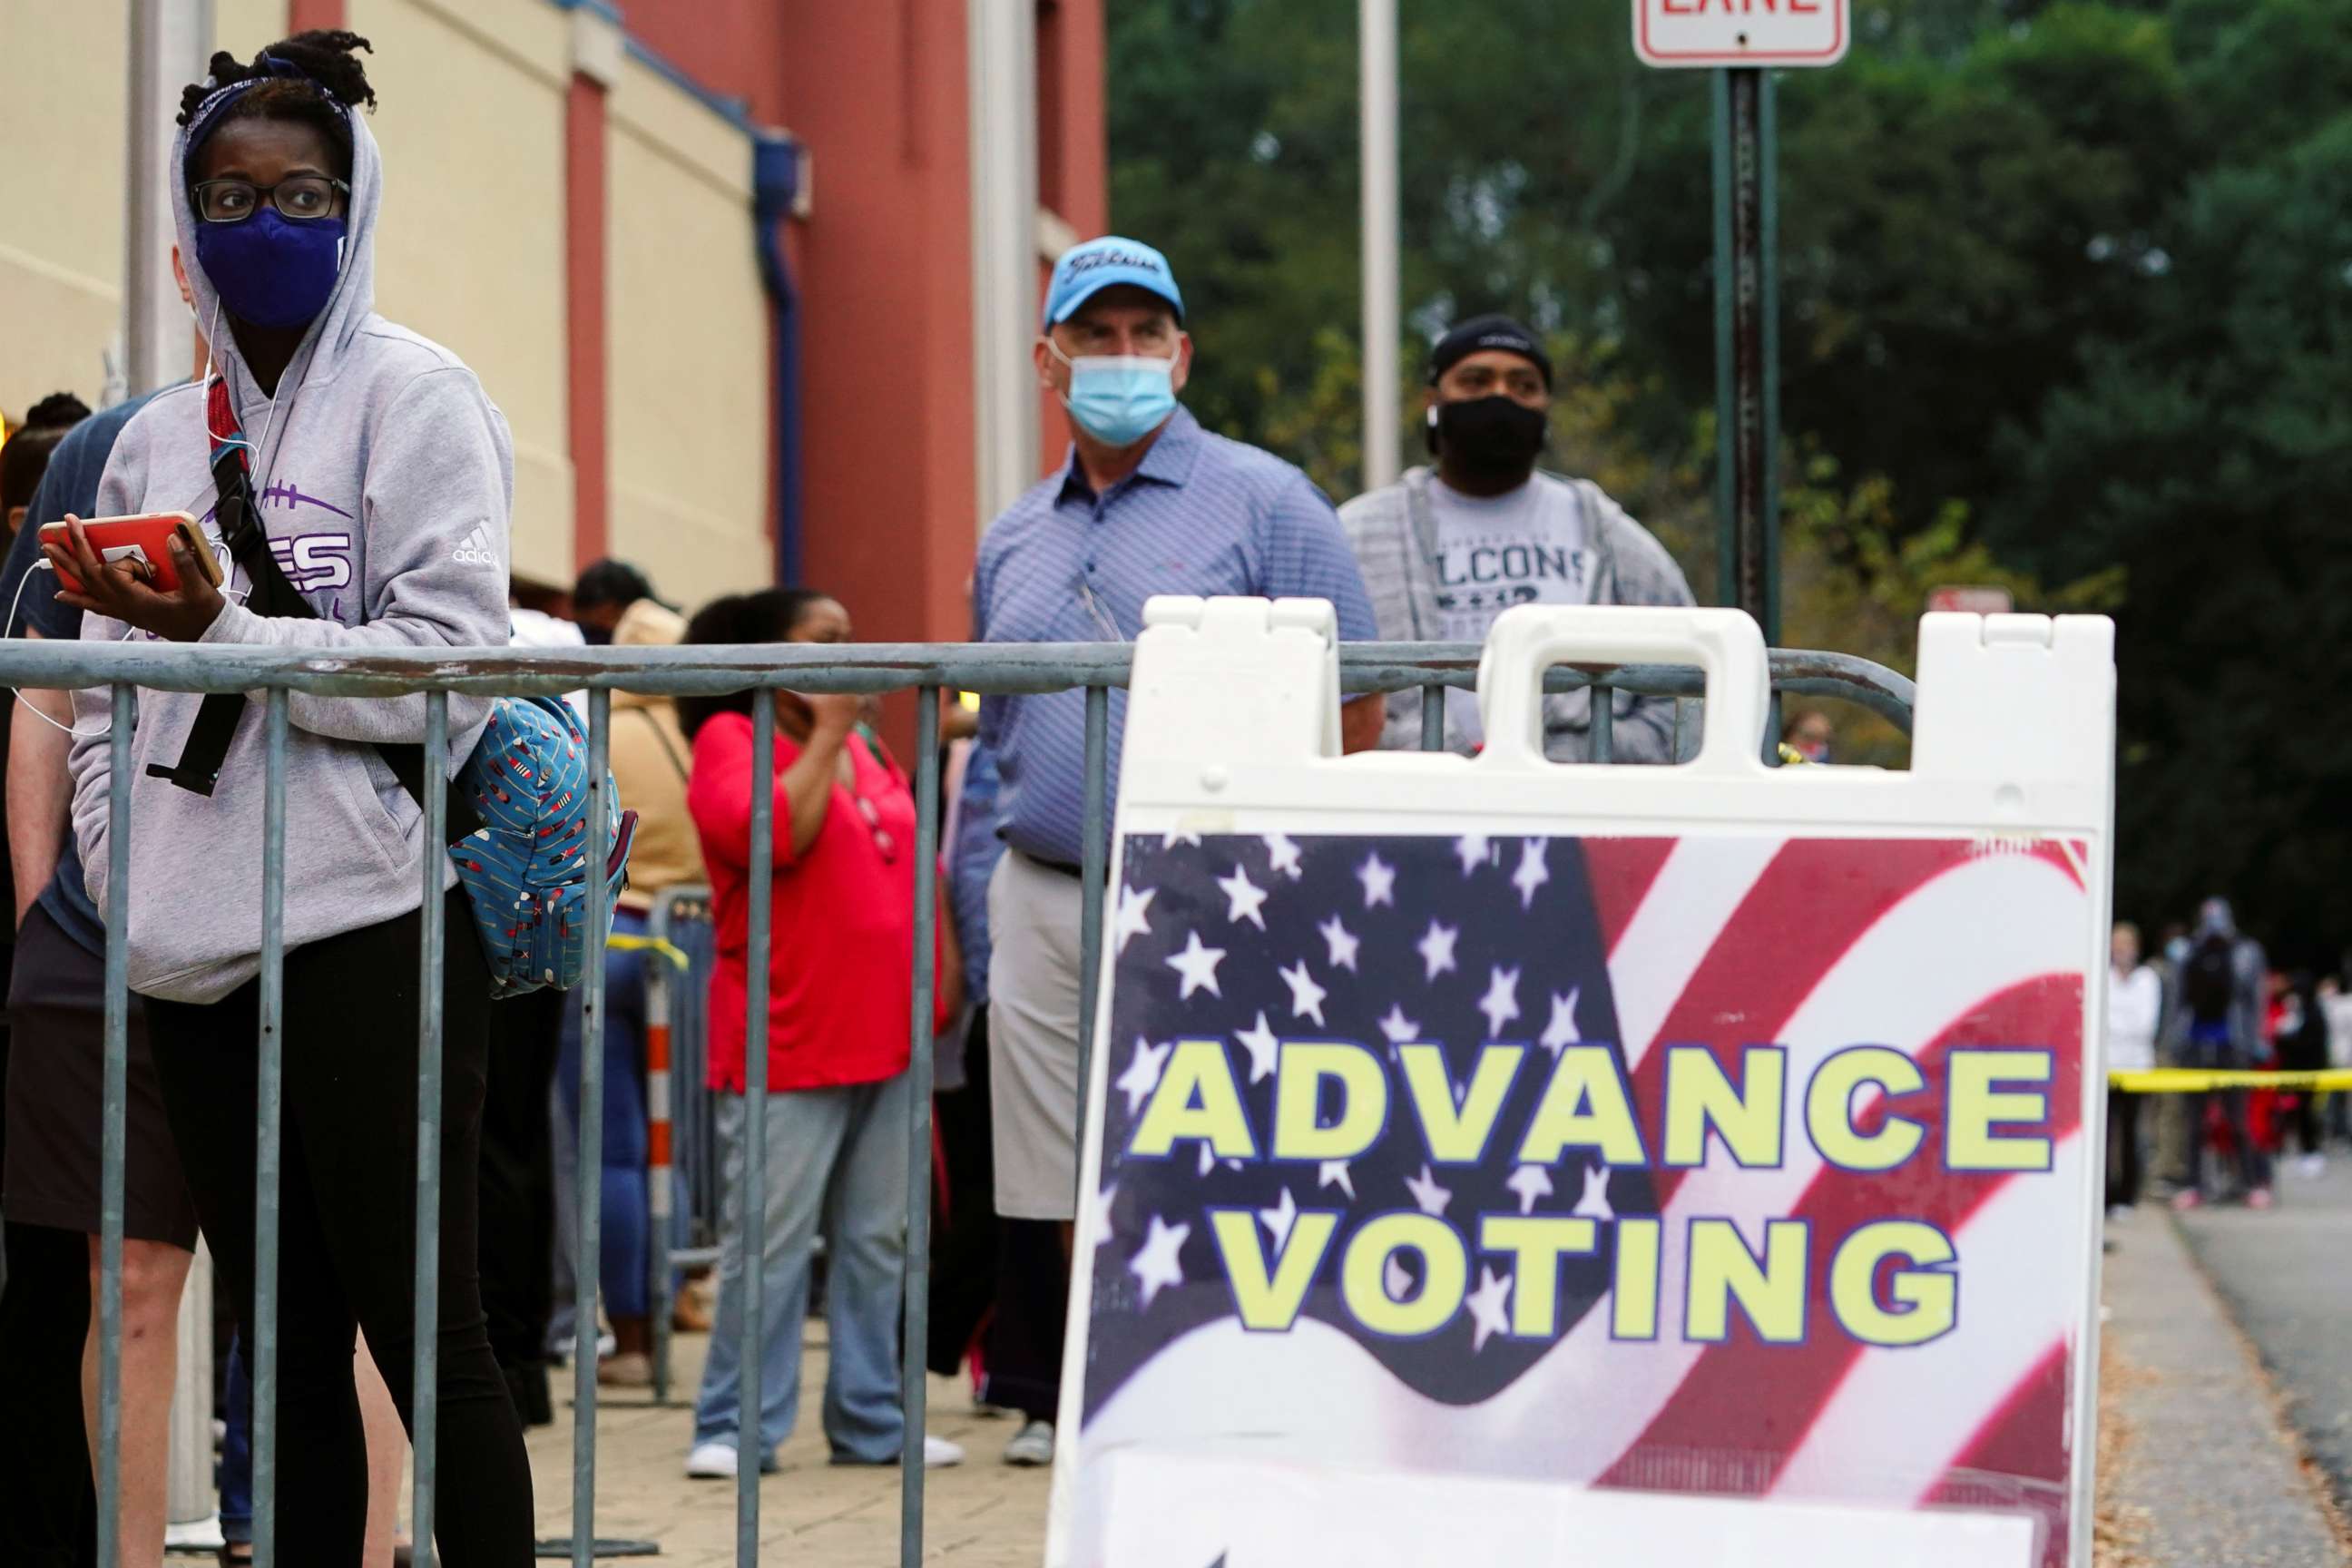 PHOTO: Voters line up to cast their election ballot at a Cobb County polling station in Marietta, Georgia, Oct. 13, 2020.